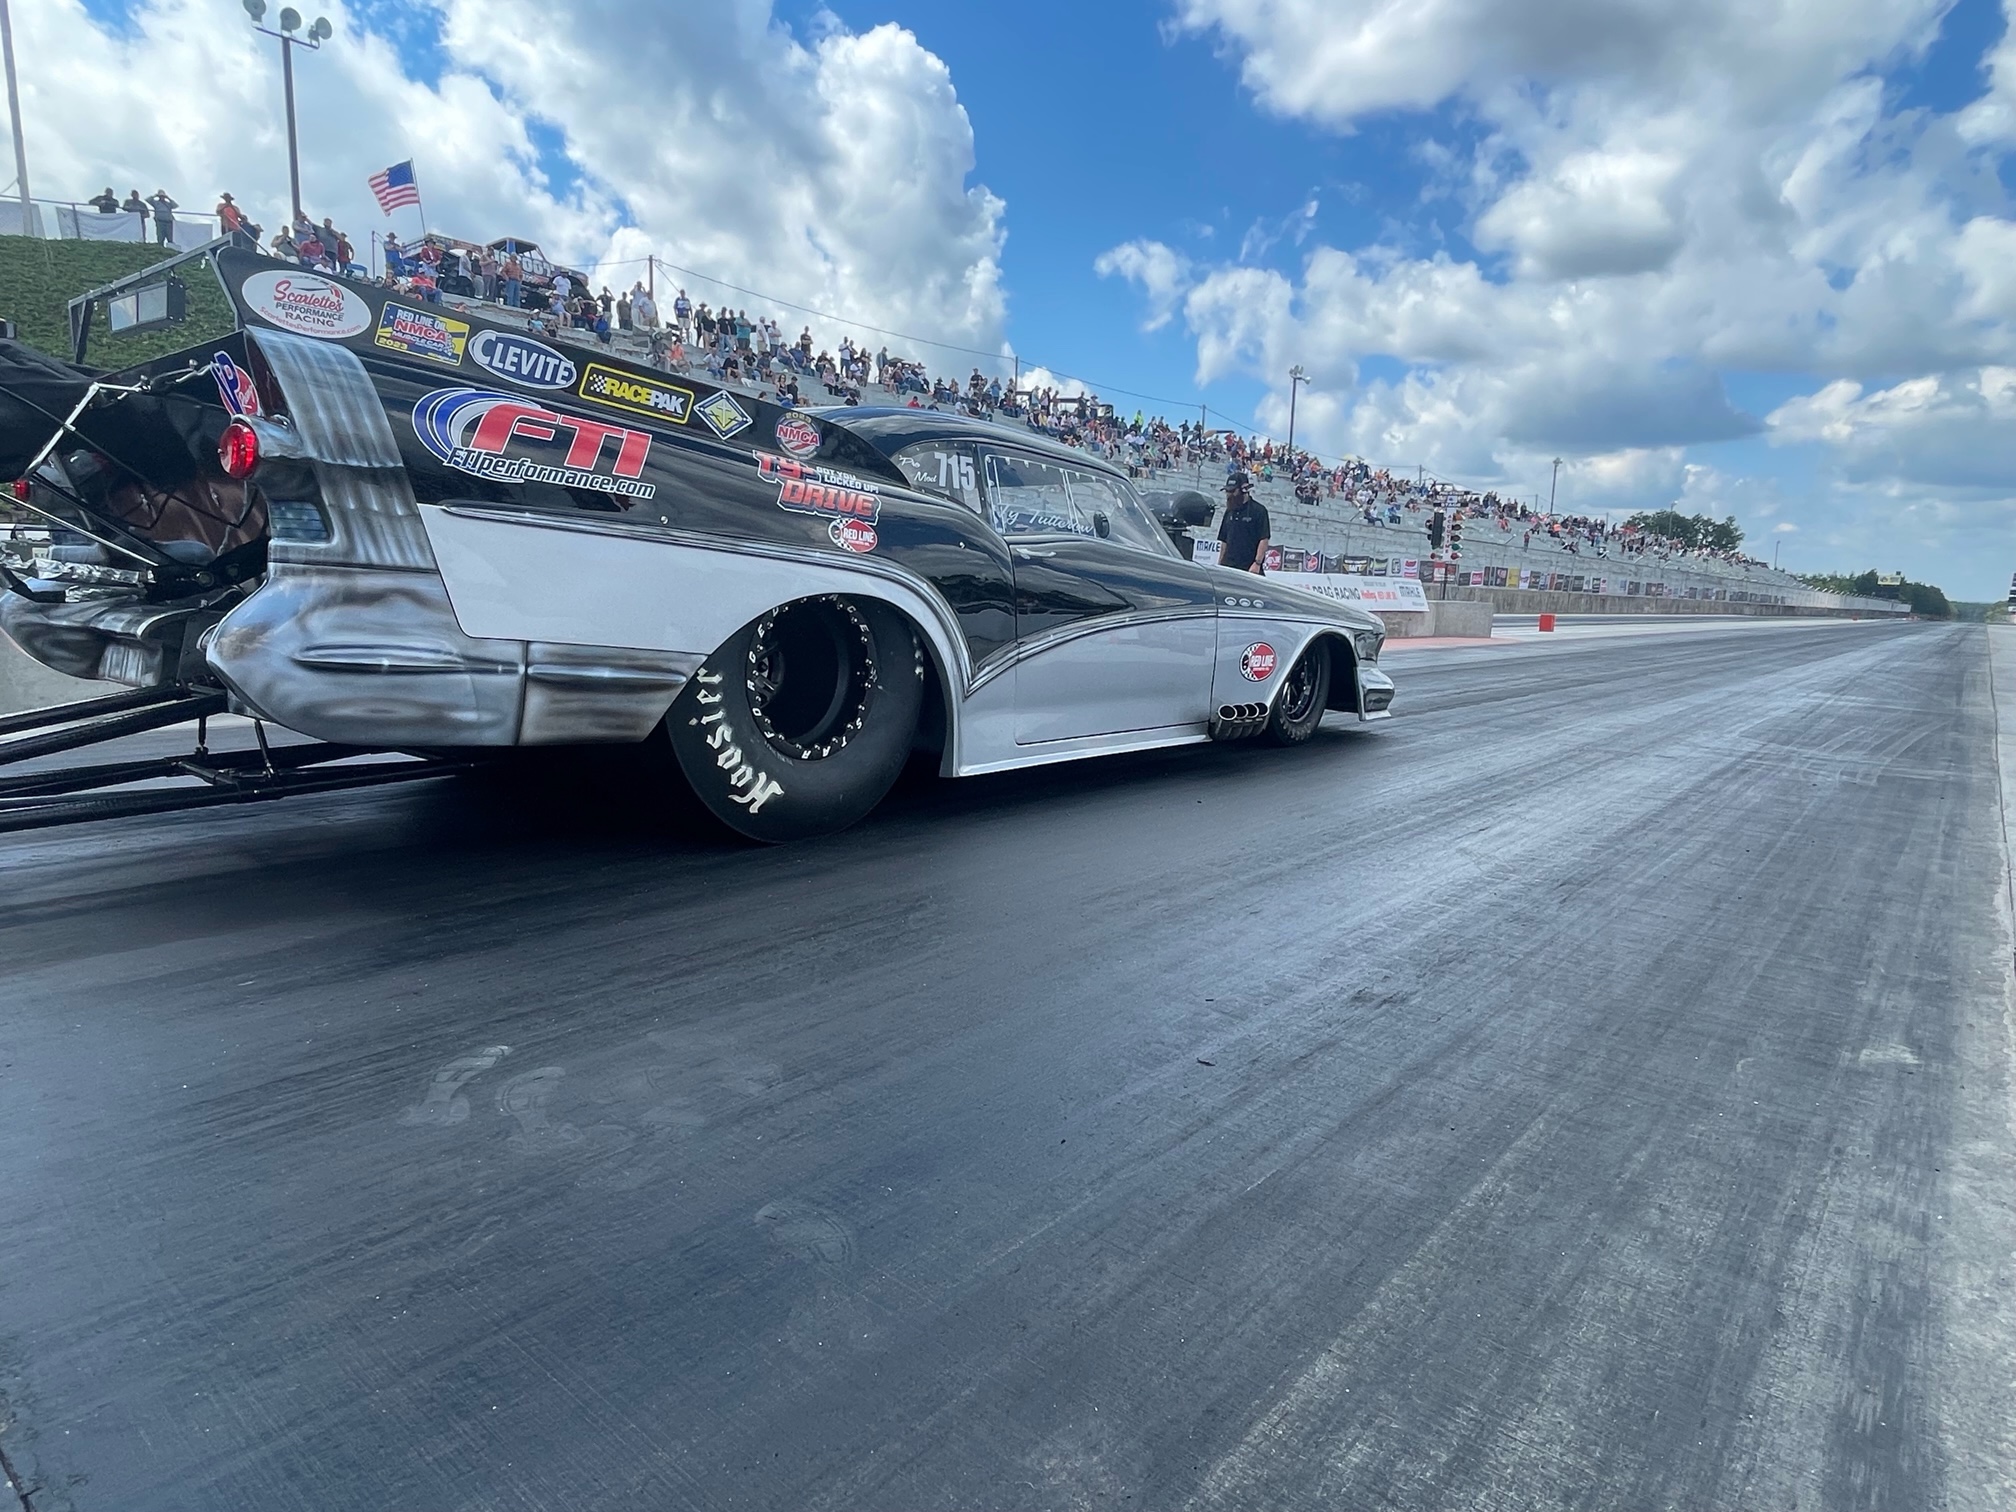 Top Drag Racers From the Sportsman and Pro Mod Ranks